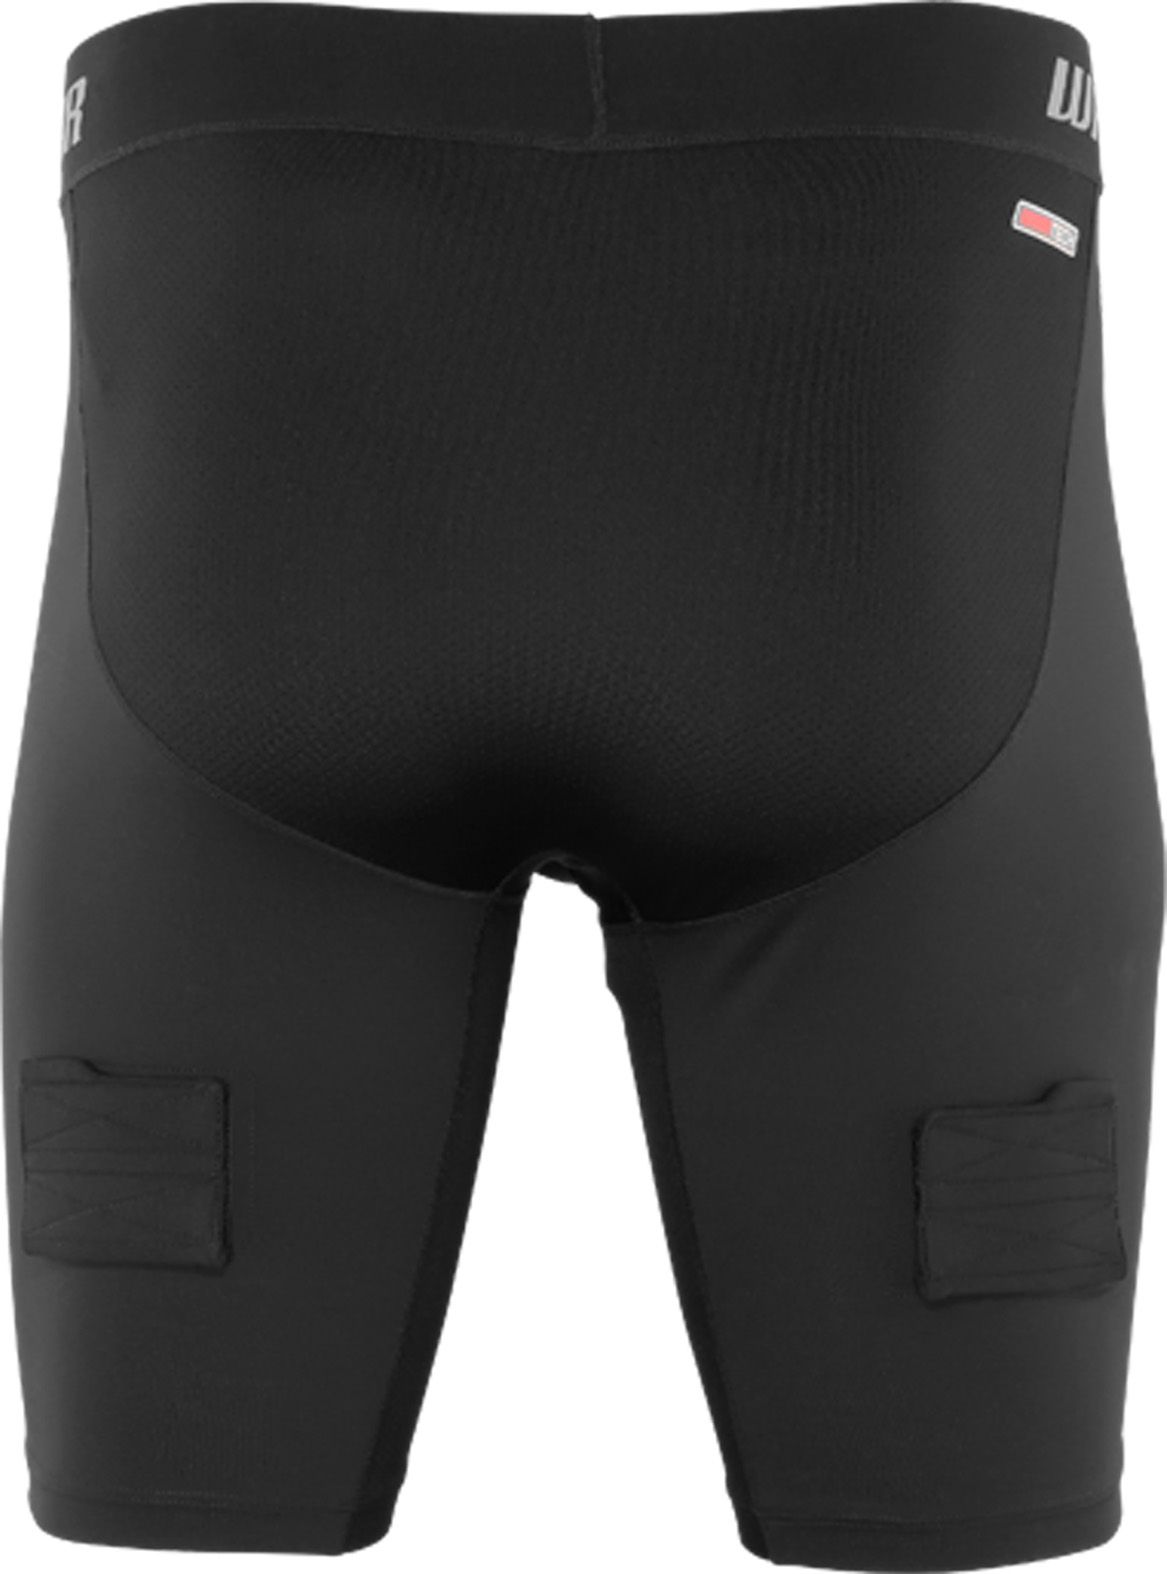 Shock Doctor Adult 2-Pack Core Compression Short with Bioflex Cup